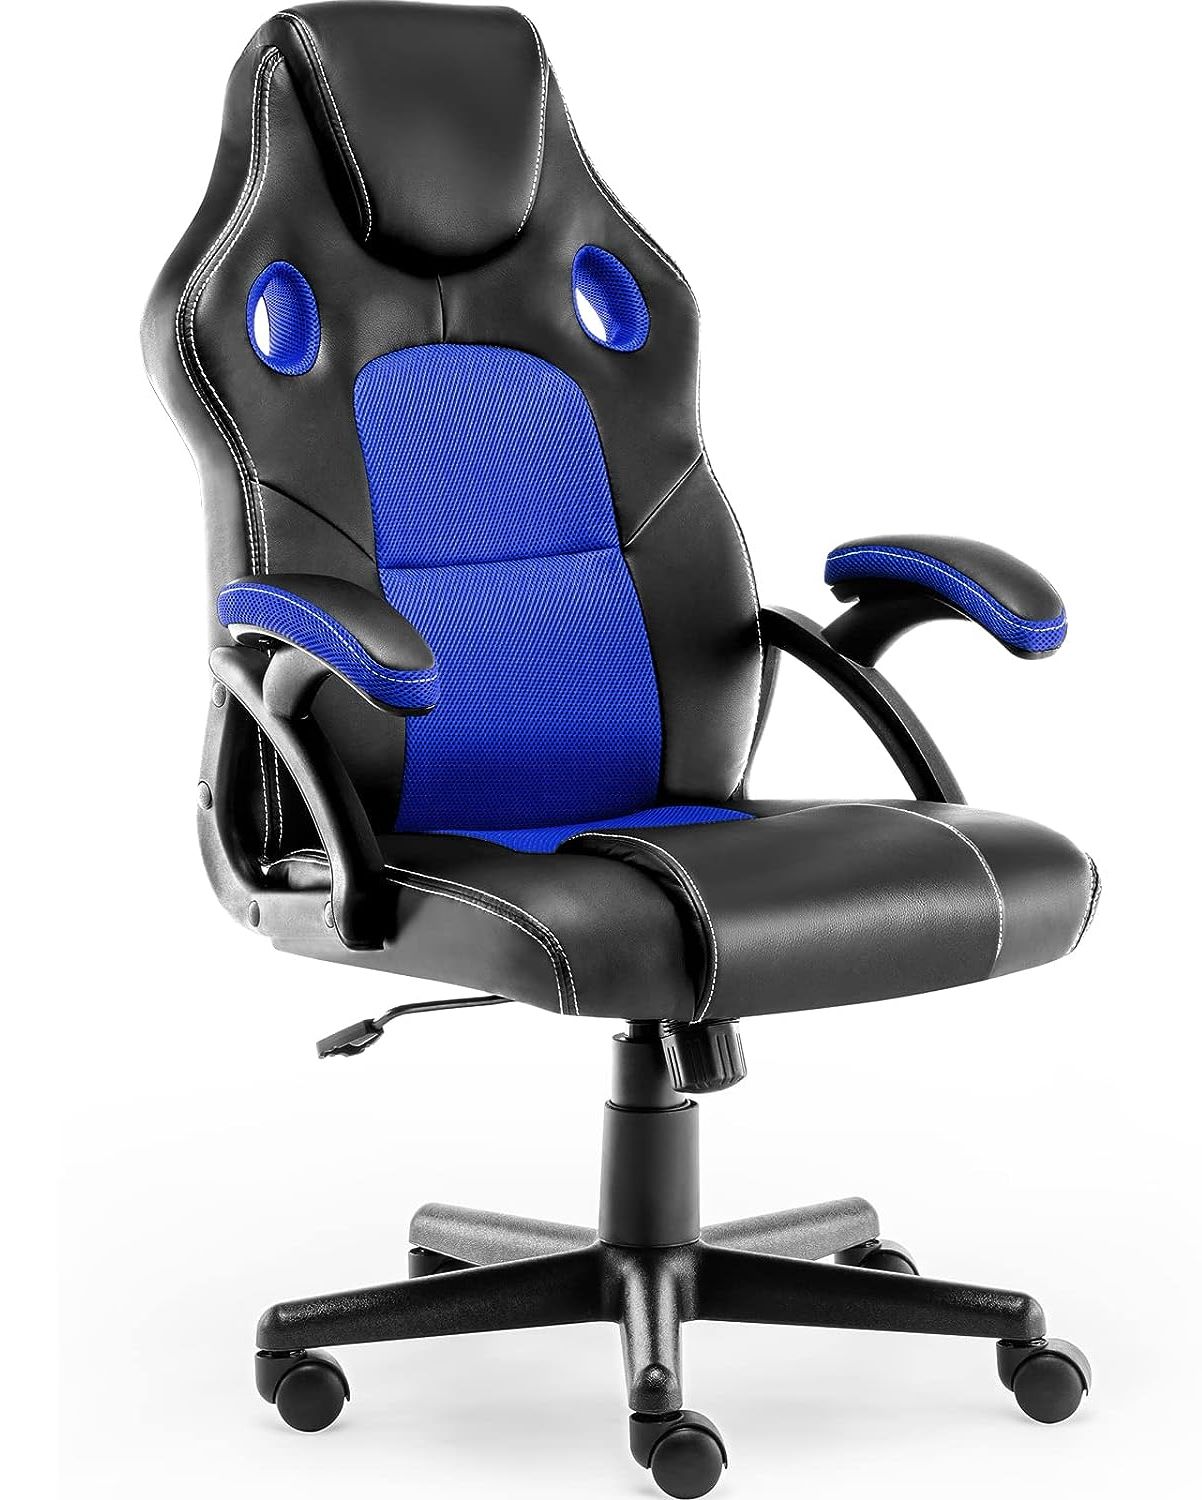 Sunon Gaming Chair,High Back Computer Chair with Headrest and Lumbar Support